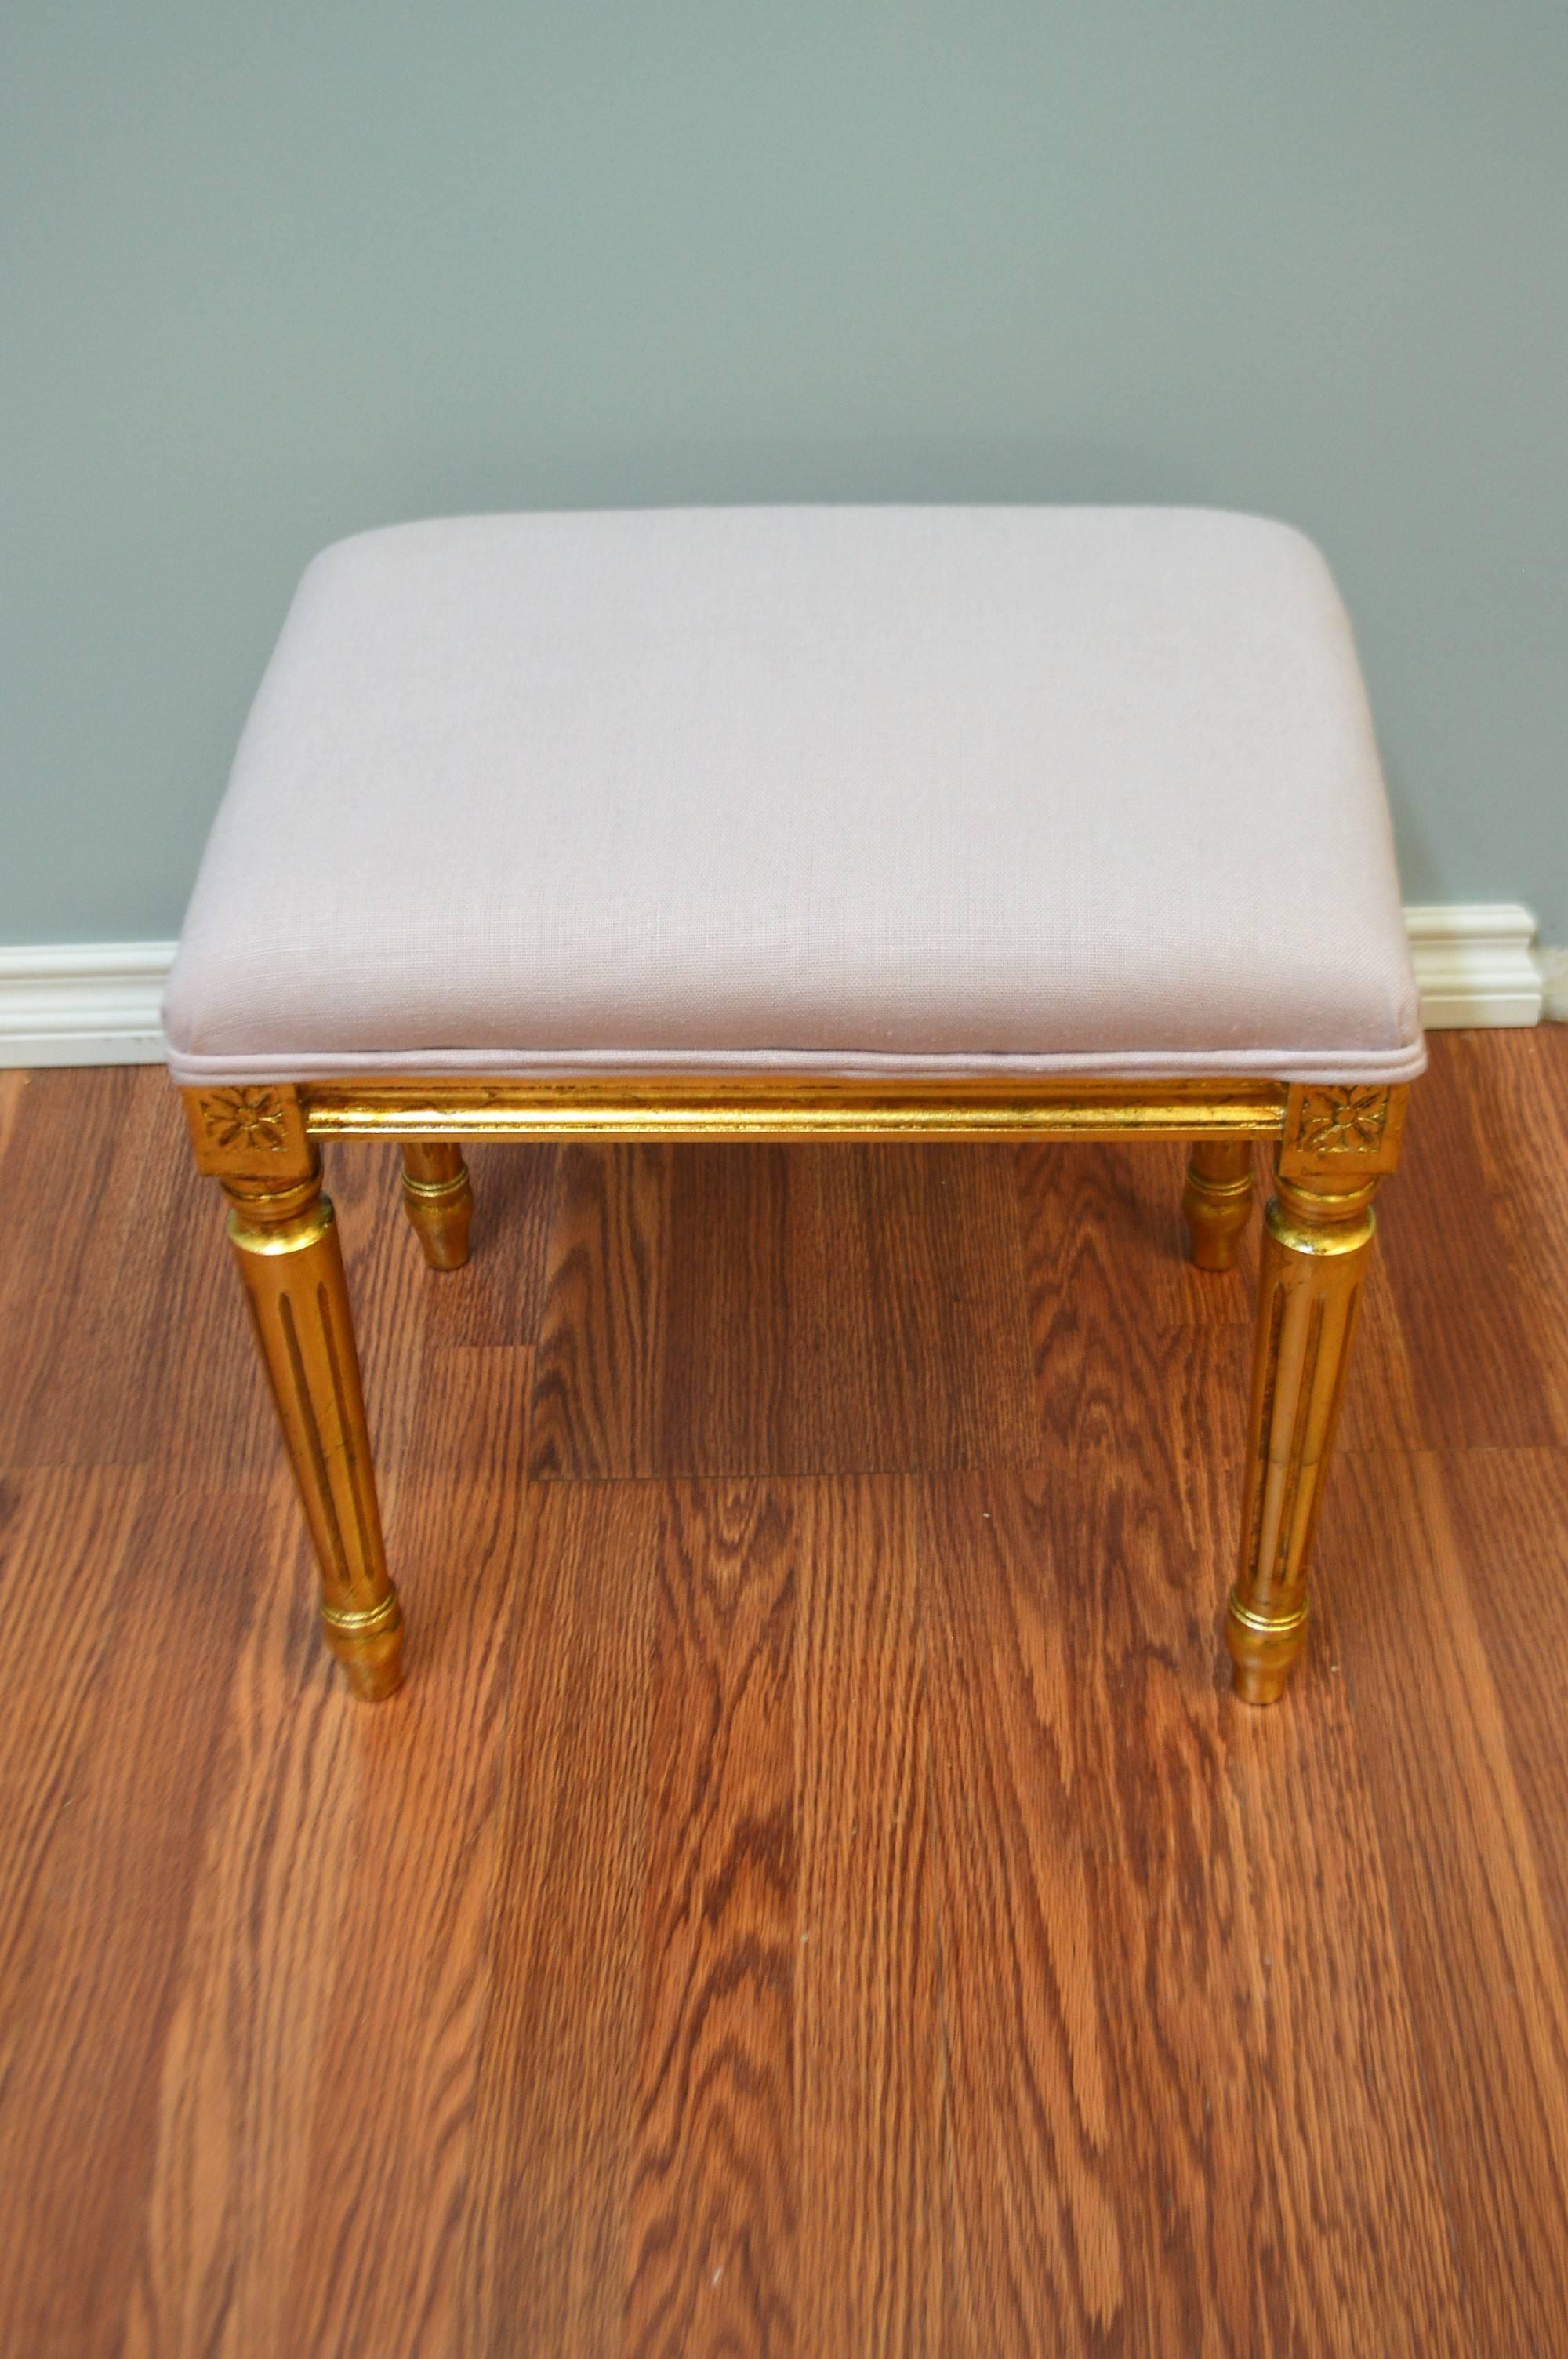 Lovely and easy to place Louis XVI style small bench for custom order.
Showing in leaf gilding, offered as well in a painted or wood stain finish of your choice.
For gold or silver leaf you provide the fabric, for painted or wood stain we include